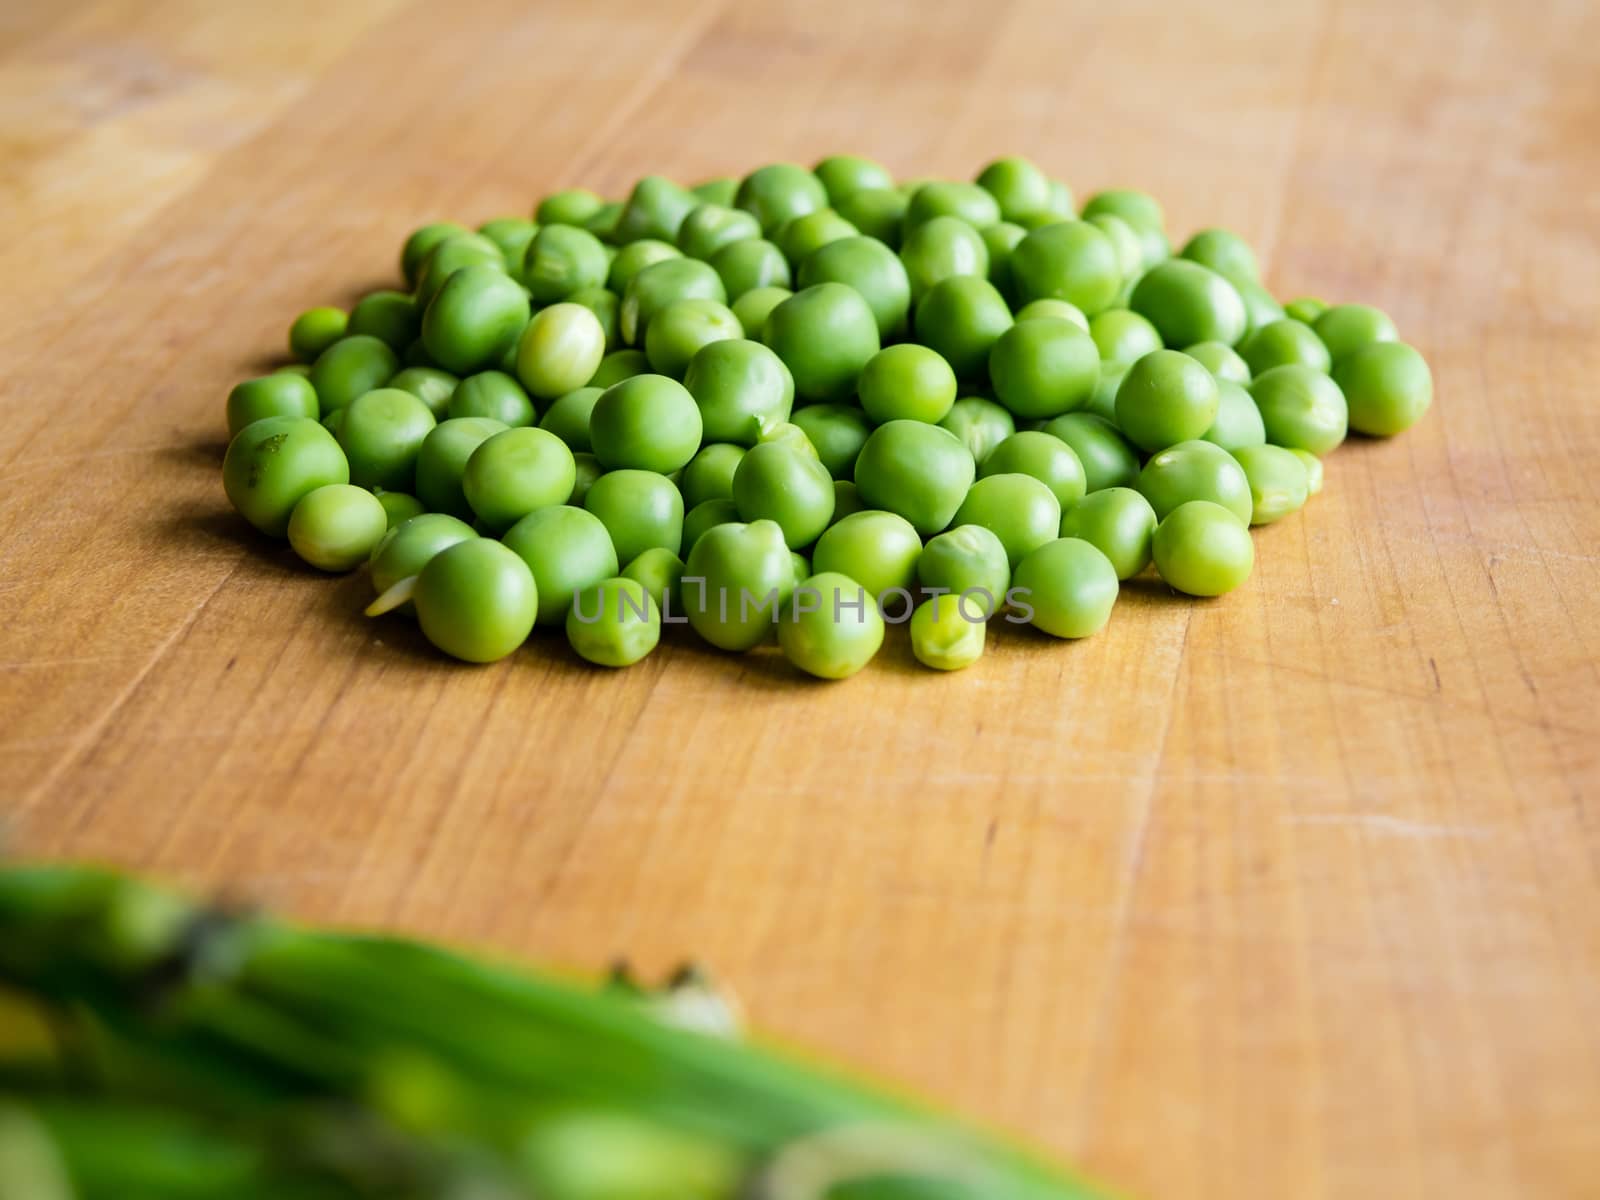 Pile of podded peas by weruskak